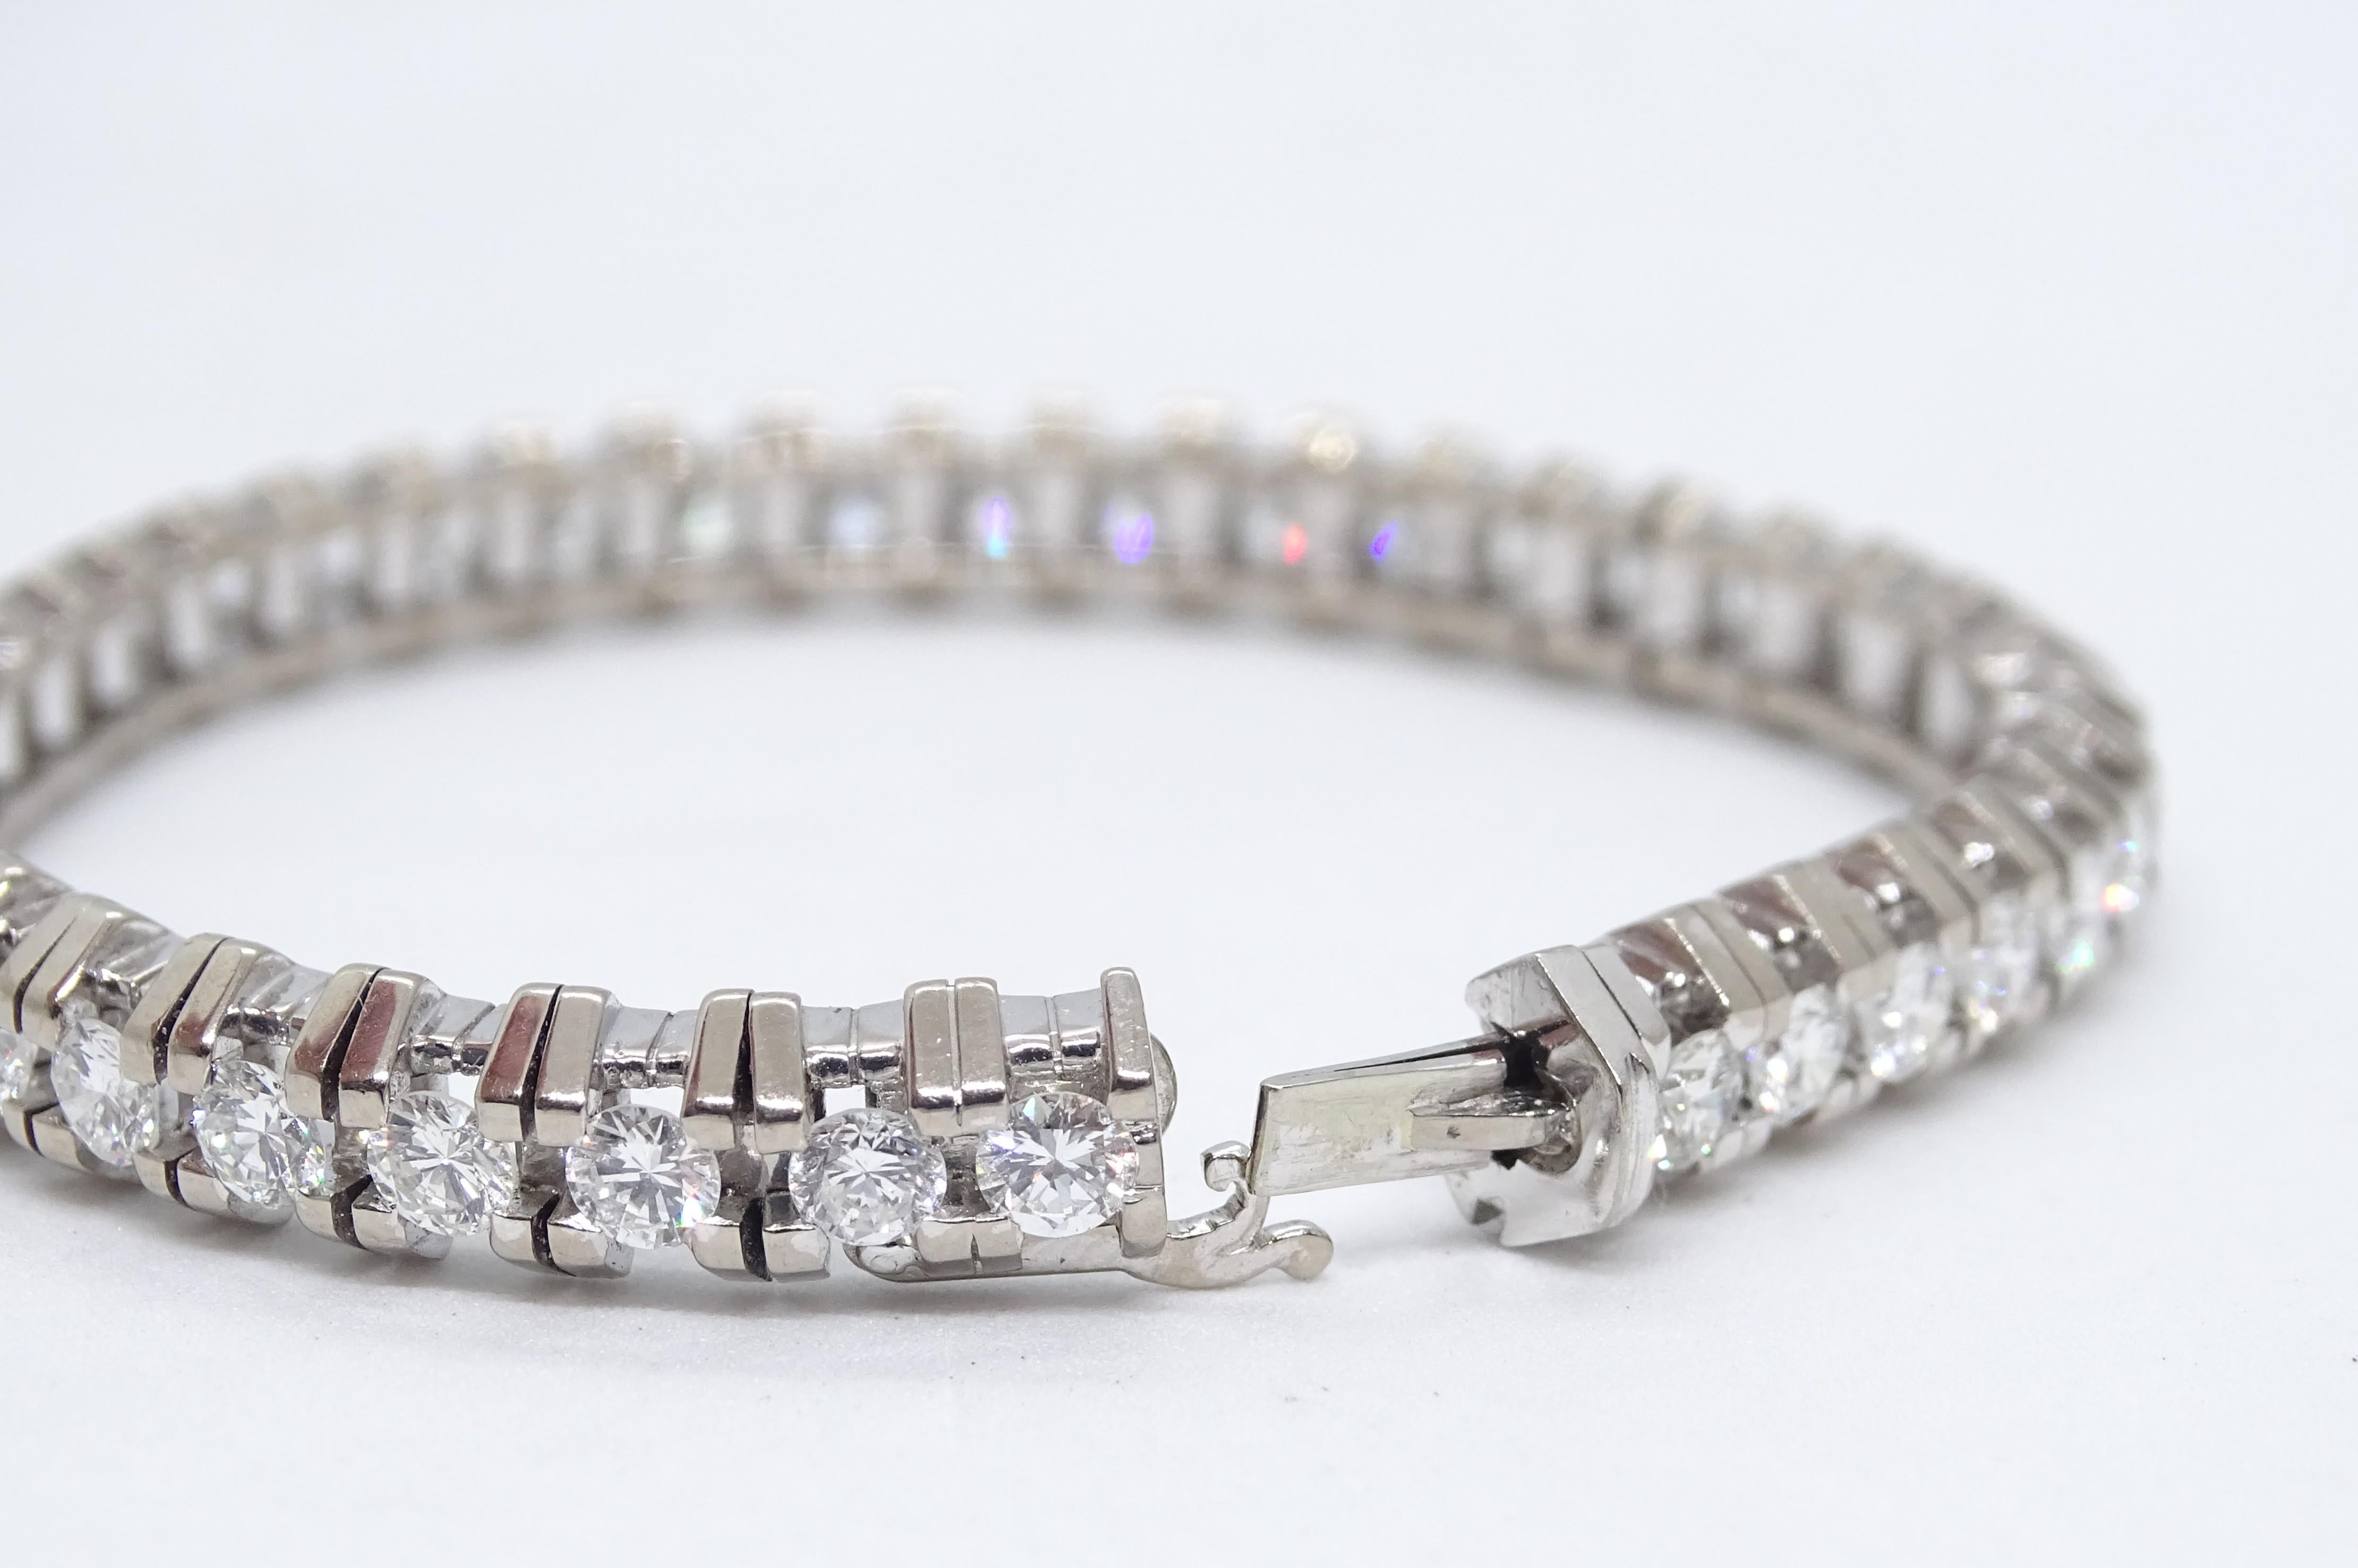 One of a kind Riviere made in 18-carat white gold and 40 brilliant-cut diamonds of 0.16 carats each, resulting in a total weight of 6.40 cts.

This type of bracelet is characterized by the infinite succession of links with diamonds. In this case,